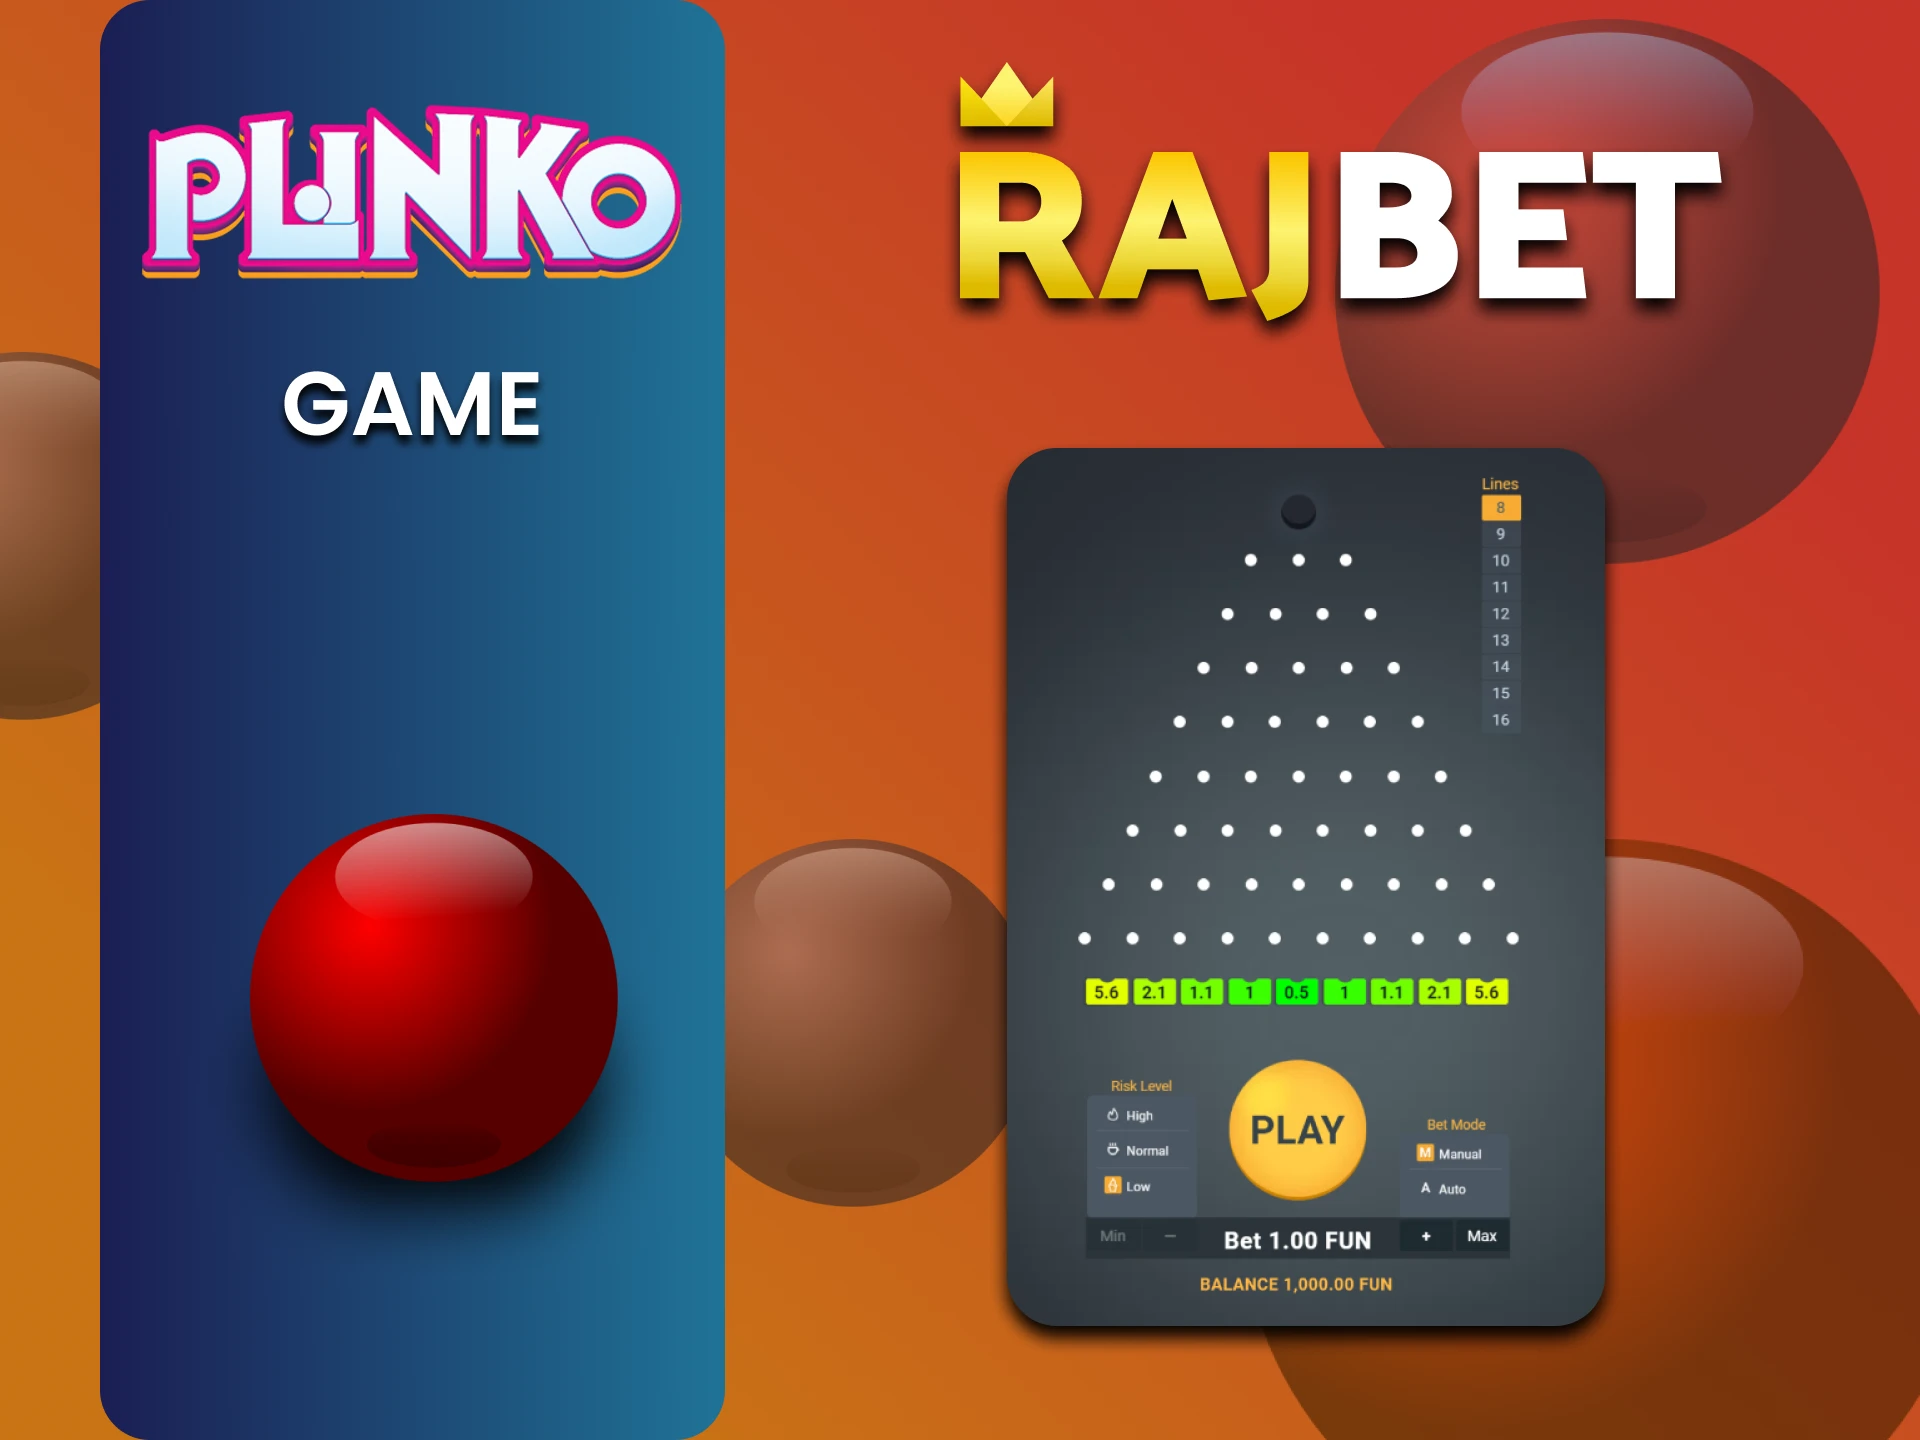 Find out all about Plinko at Rajbet.